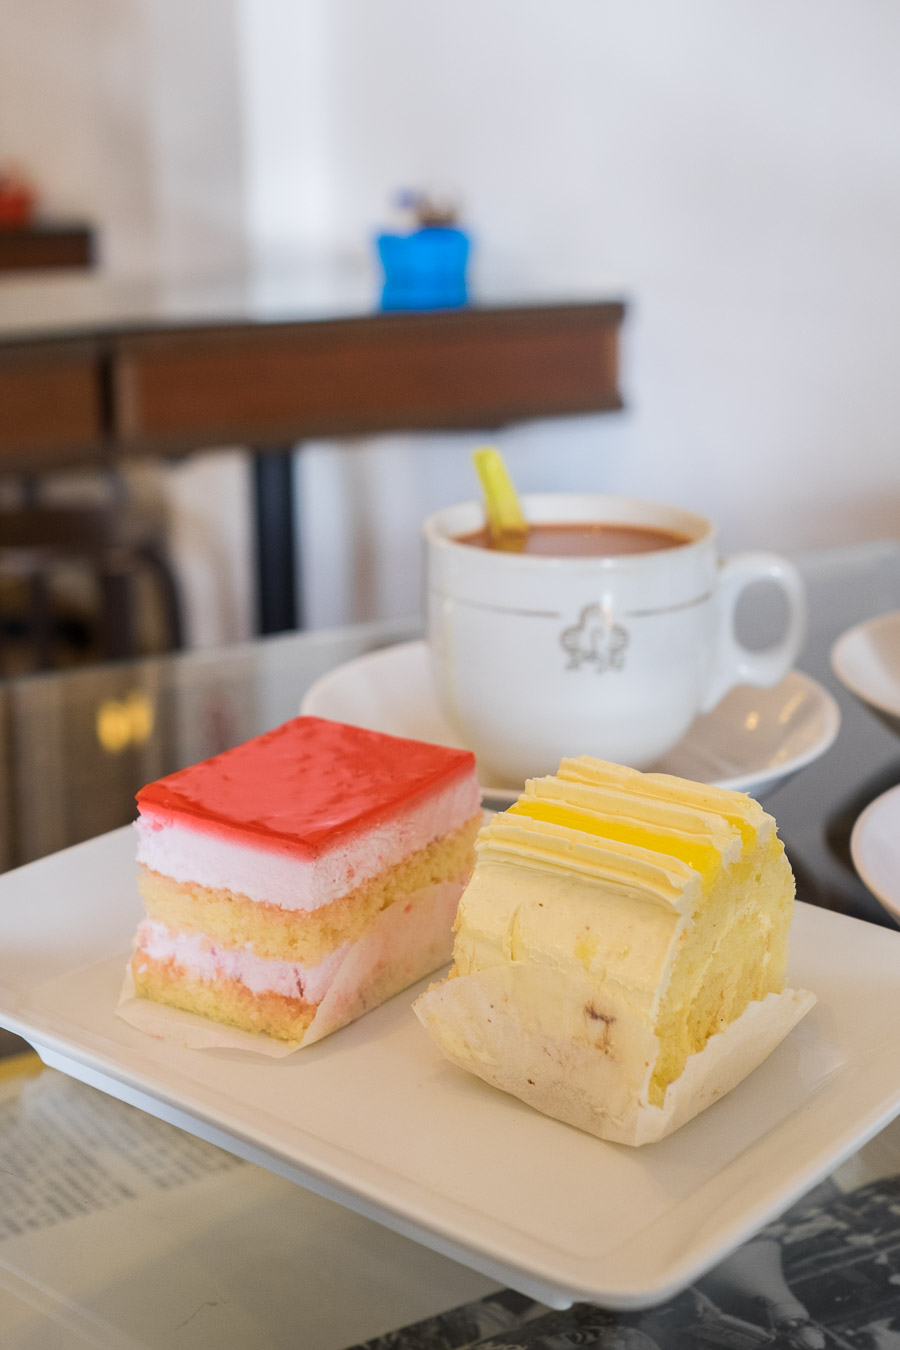 Strawberry mousse cake and good old lemon roll. The sponge cakes were soft and fluffy.